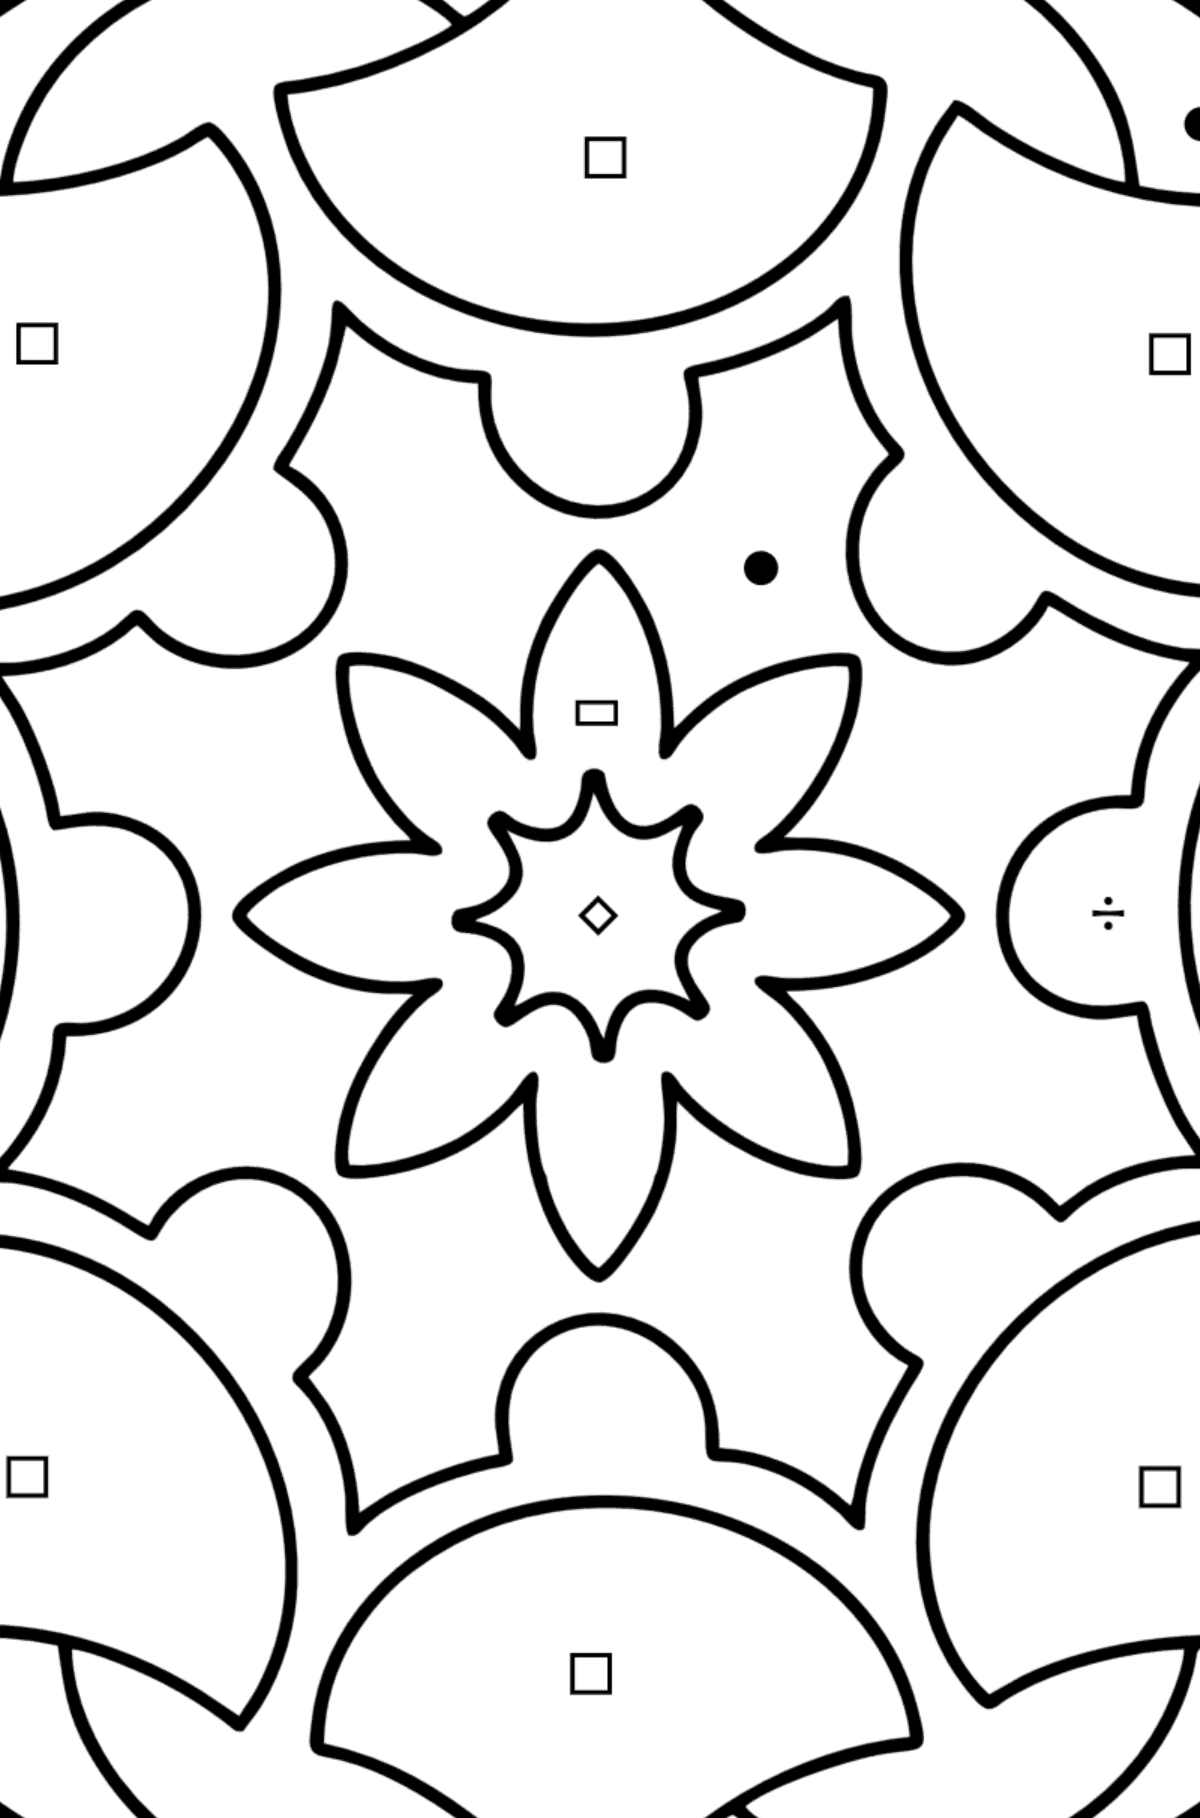 Mandala coloring page - 13 elements - Coloring by Symbols and Geometric Shapes for Kids